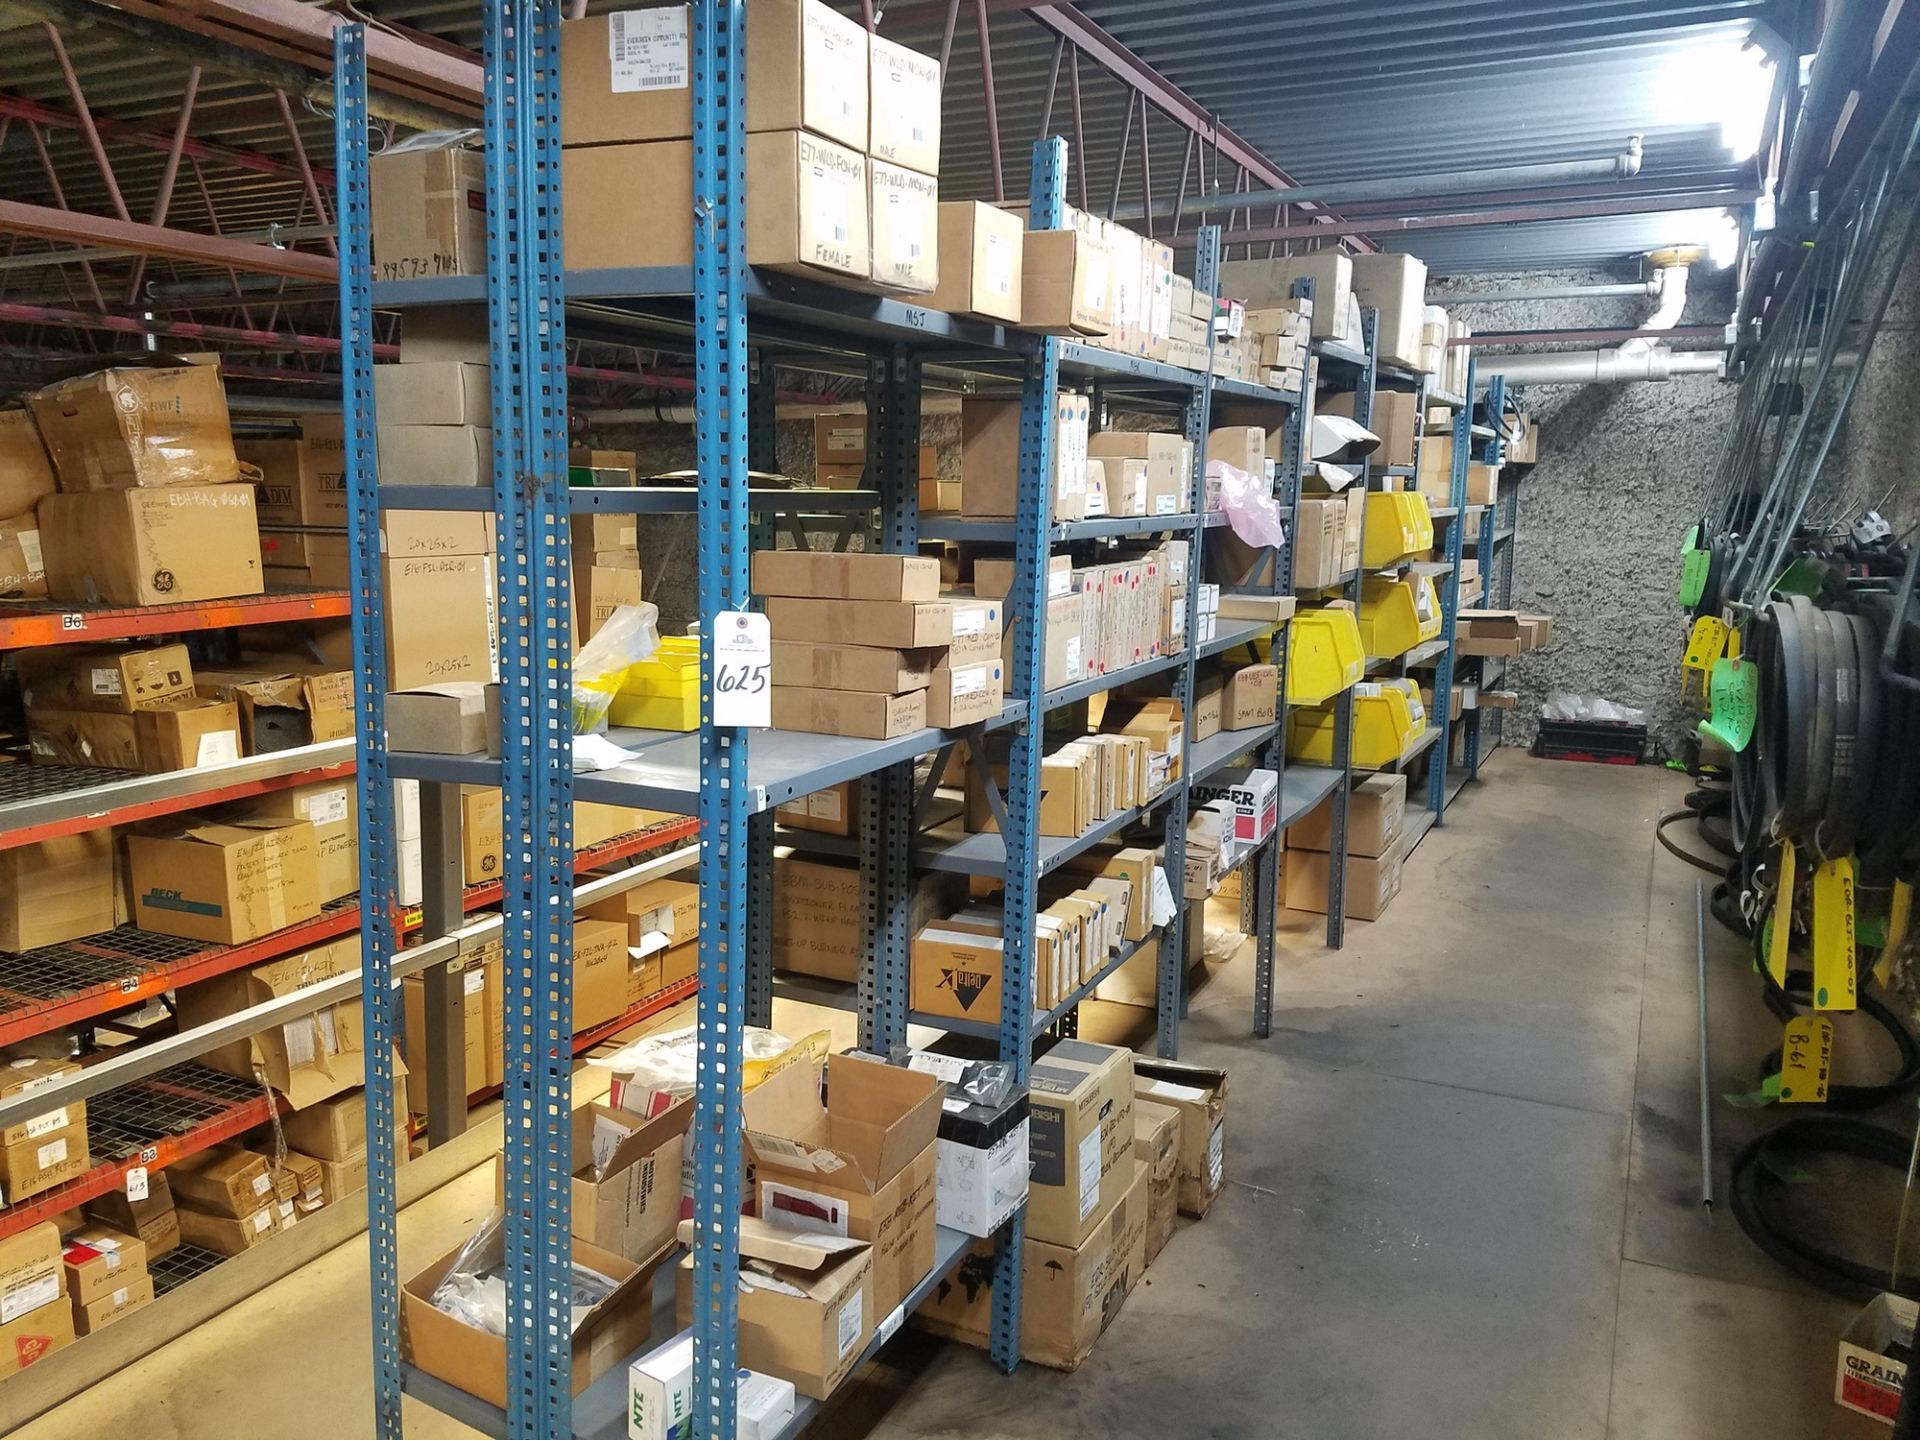 Contents of Spare Parts Storage Area On Mezzanine | Rig Fee: $400